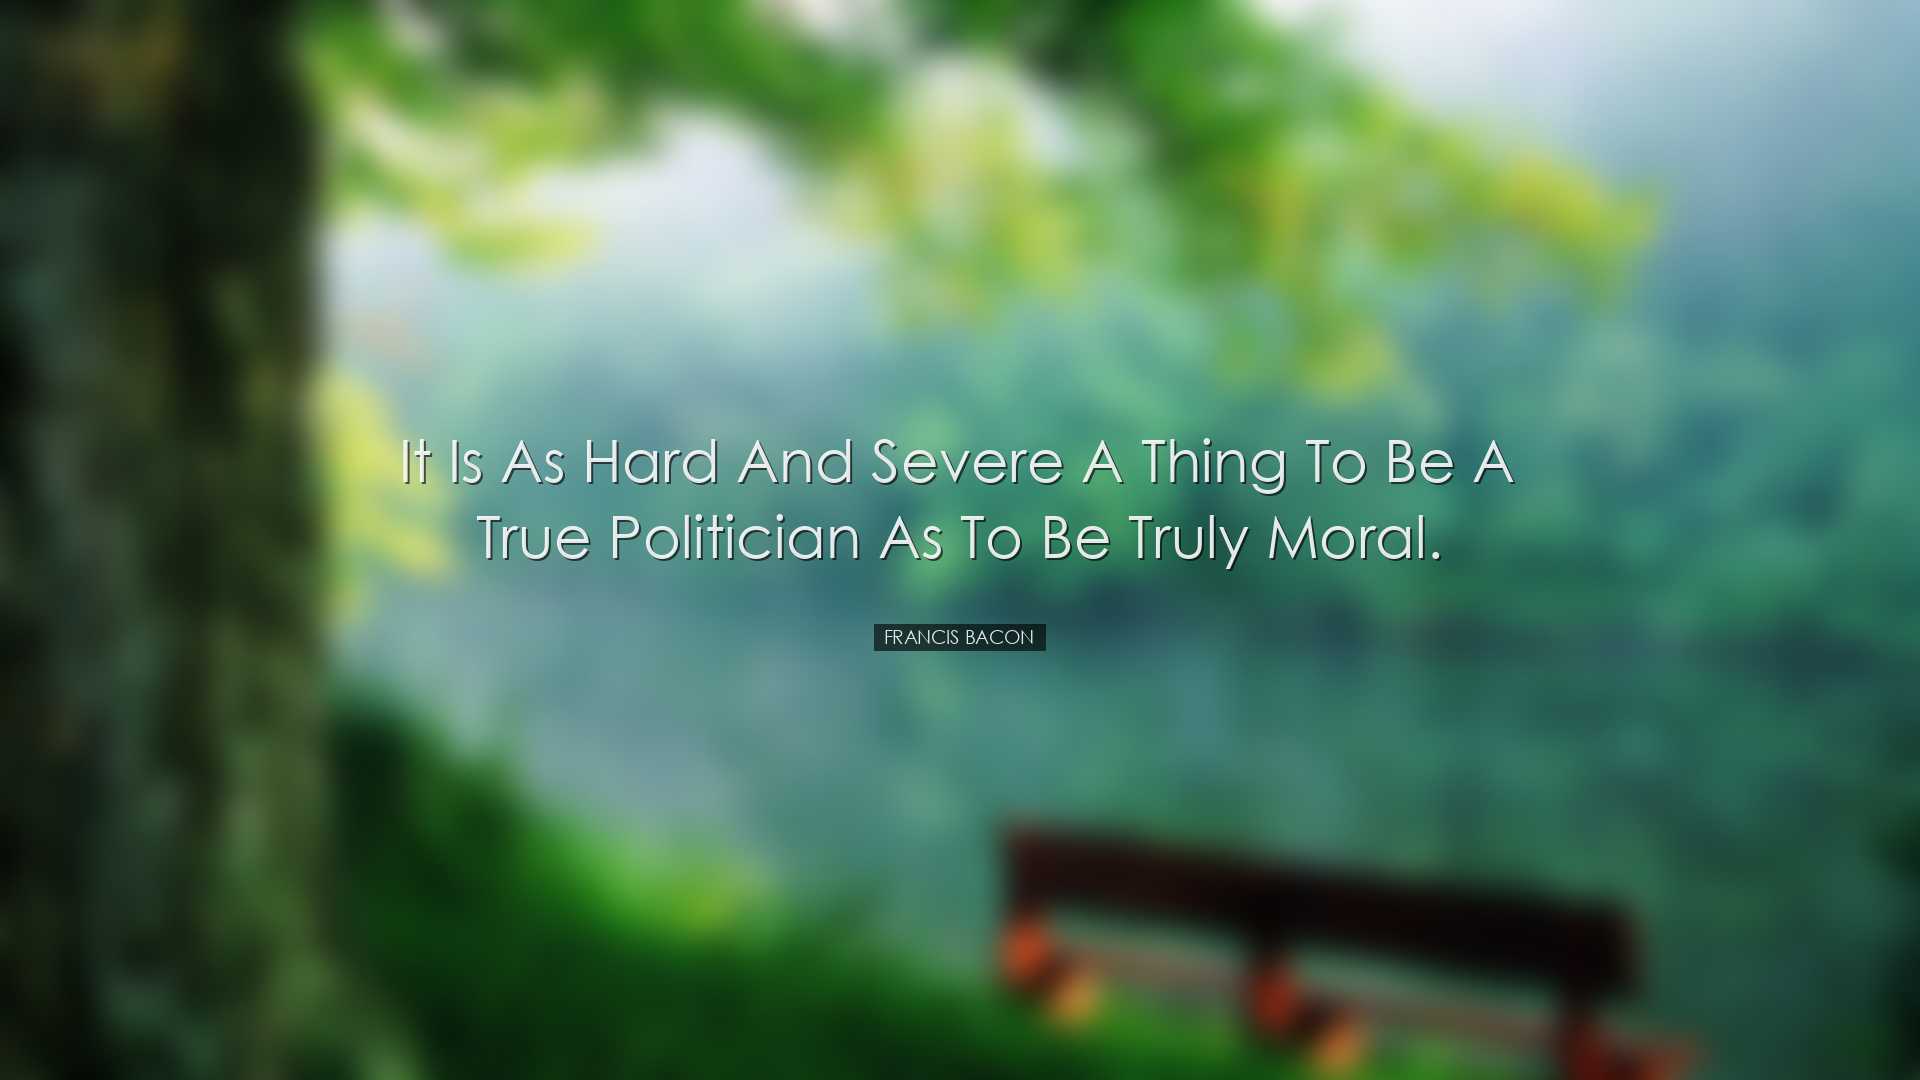 It is as hard and severe a thing to be a true politician as to be